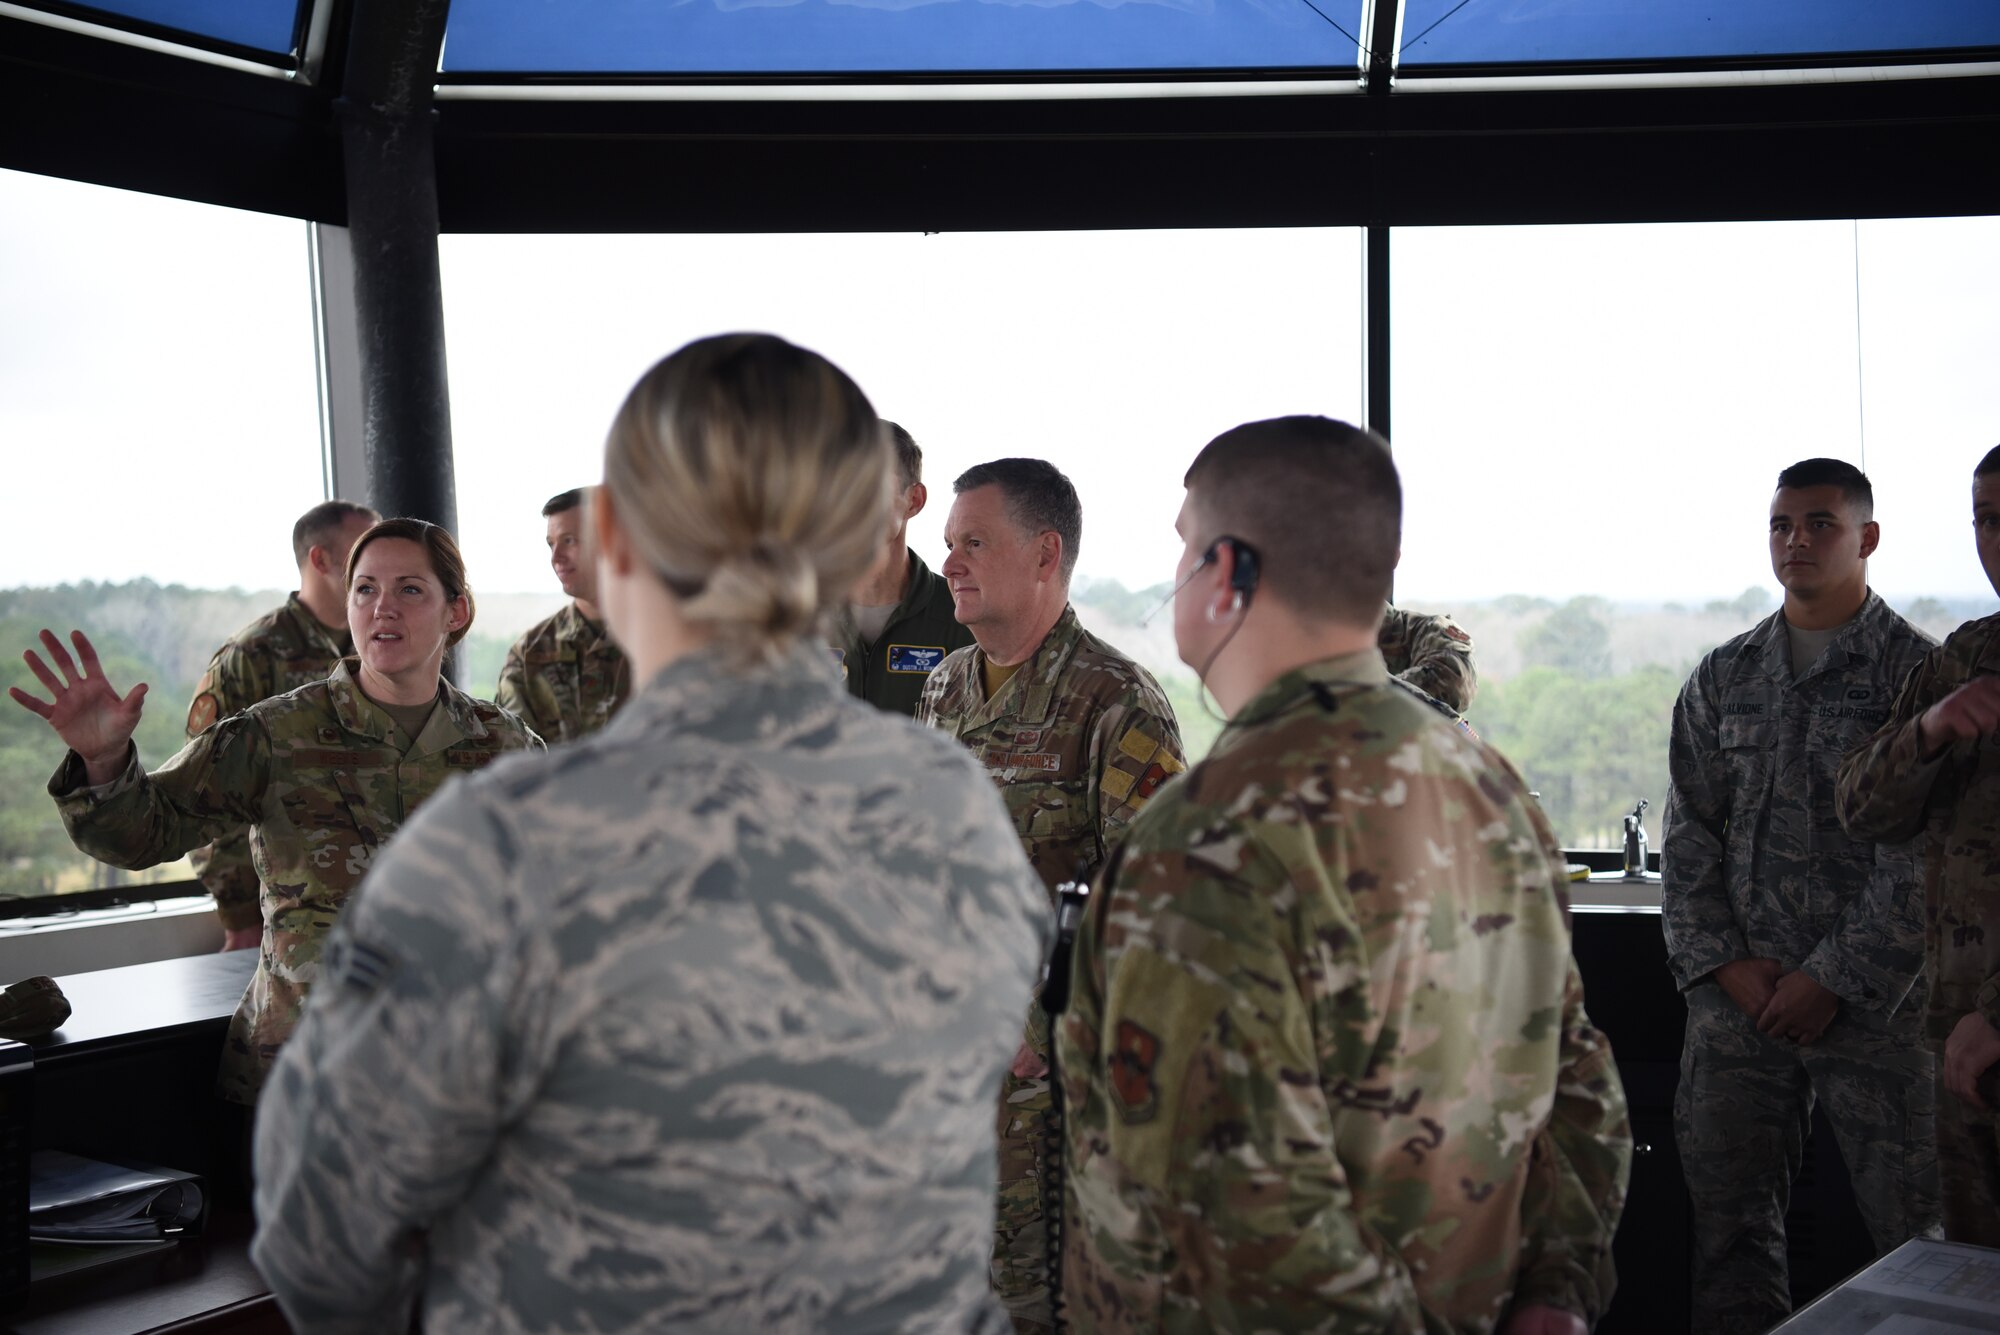 U.S. Air Force Col. Samantha Weeks, 14th Flying Training Wing commander, talks to U.S. Air Force Lt. Gen. Brad Webb, commander of Air Education and Training Command, while in the air traffic control tower during a wing immersion Feb. 5, 2020, on Columbus AFB, Mississippi. During their visit, the AETC command team got a good look at what the 14th FTW is doing to revolutionize pilot training and move it forward in the future. (U.S. Air Force photo by Airman 1st Class Jake Jacobsen)